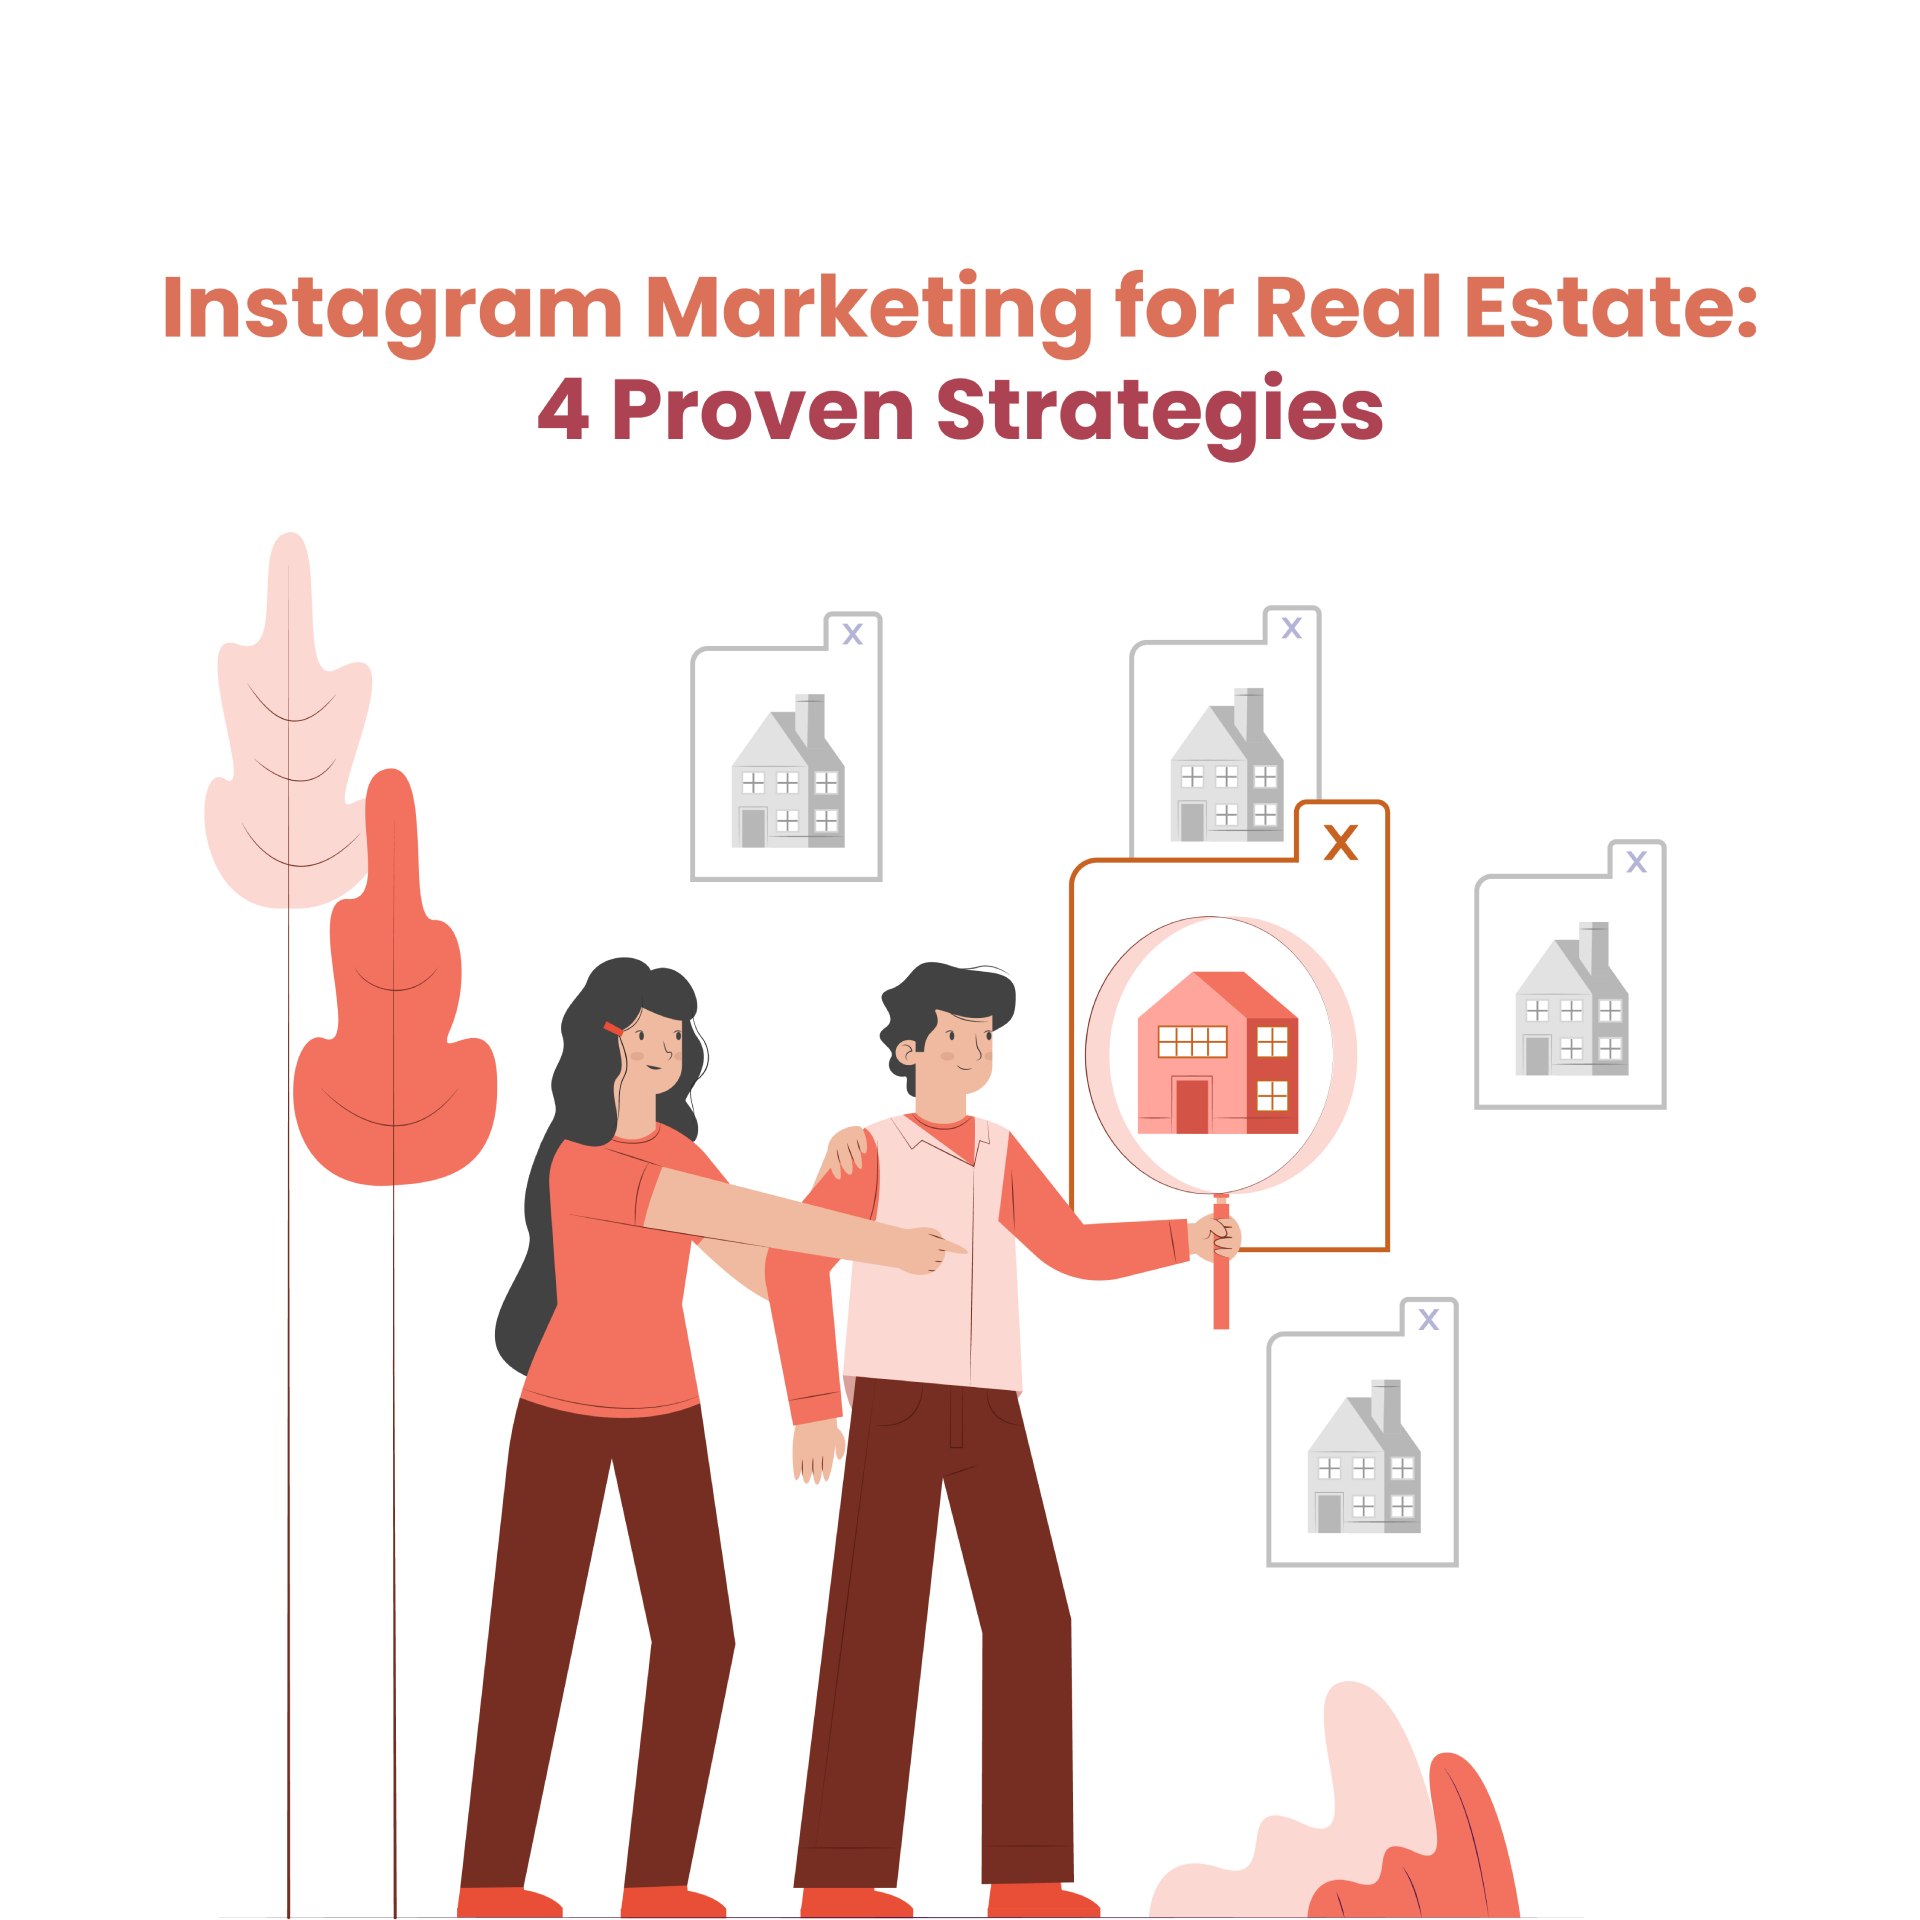 4 ways to promote your real estate project using Instagram Marketing